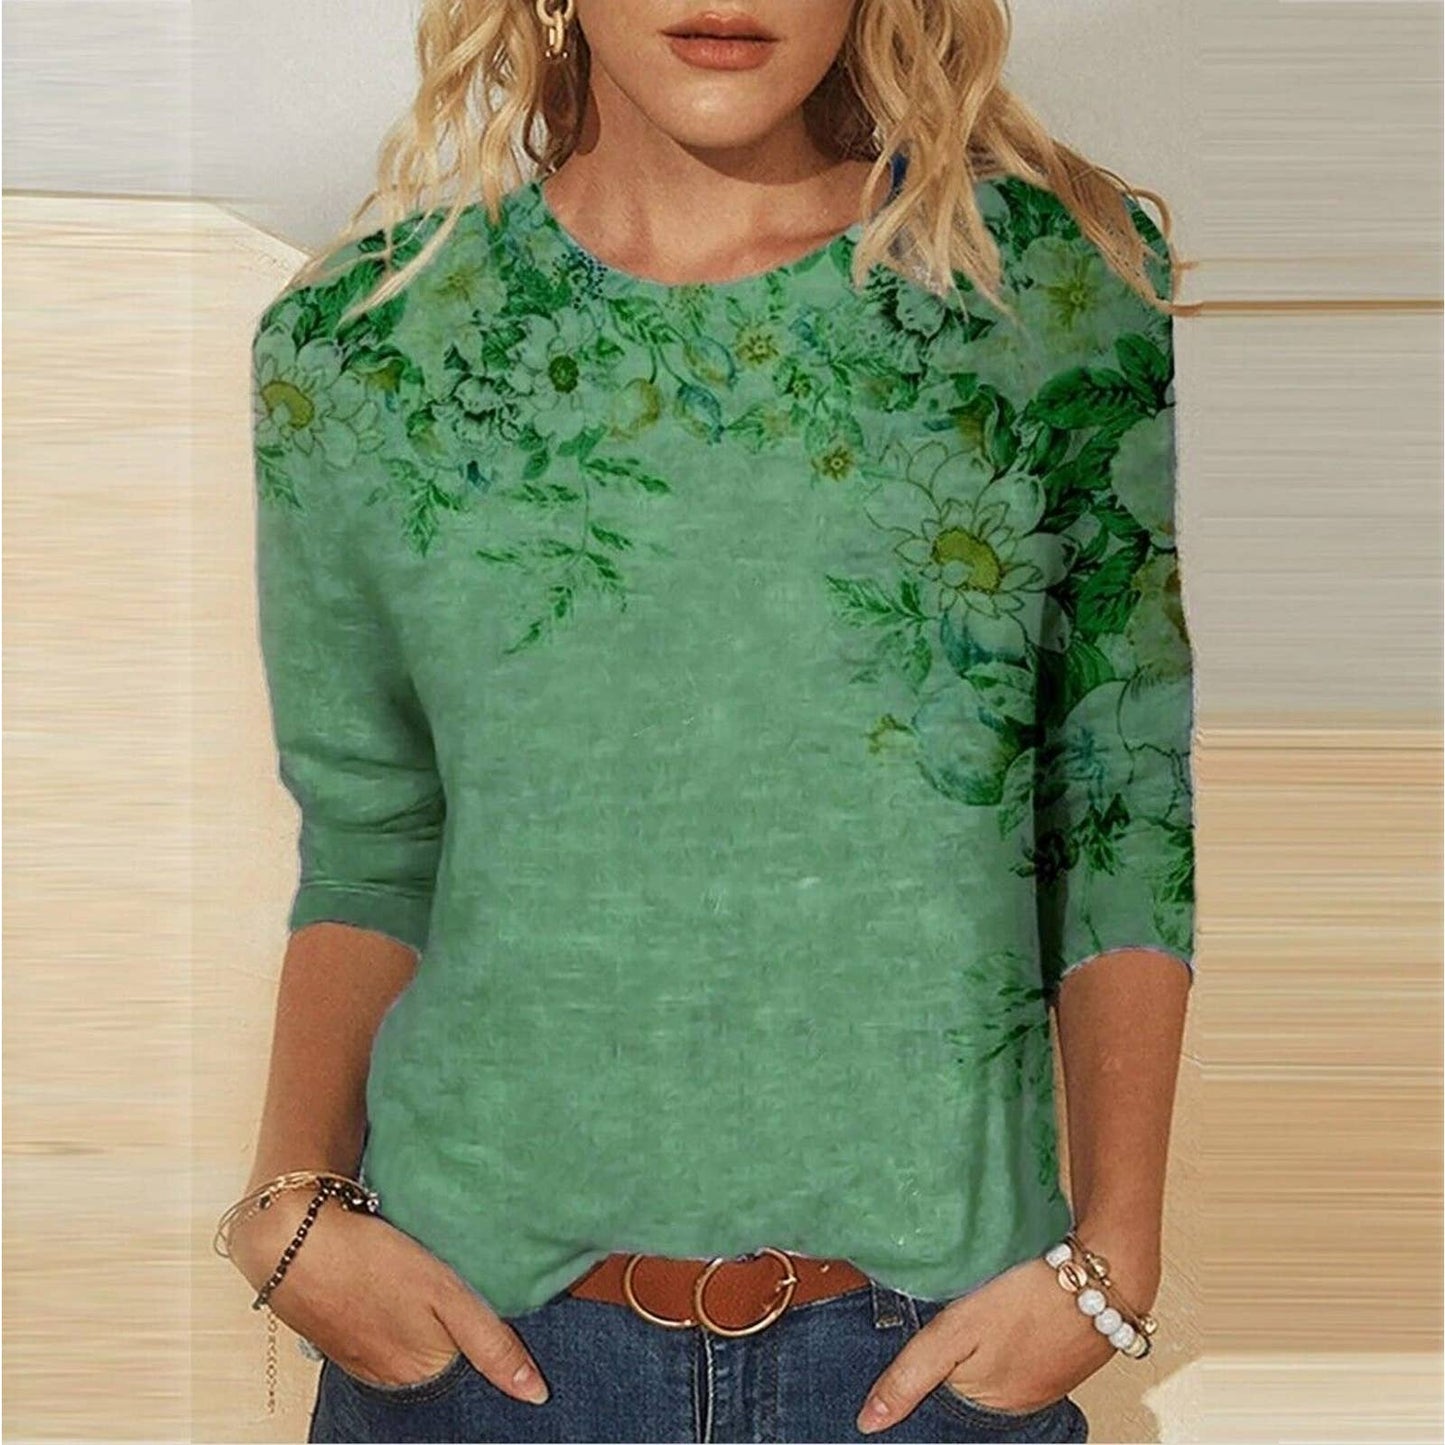 SHEIN Women's Green Polyester Crew Neck Long Sleeve Casual Top Shirt Size M